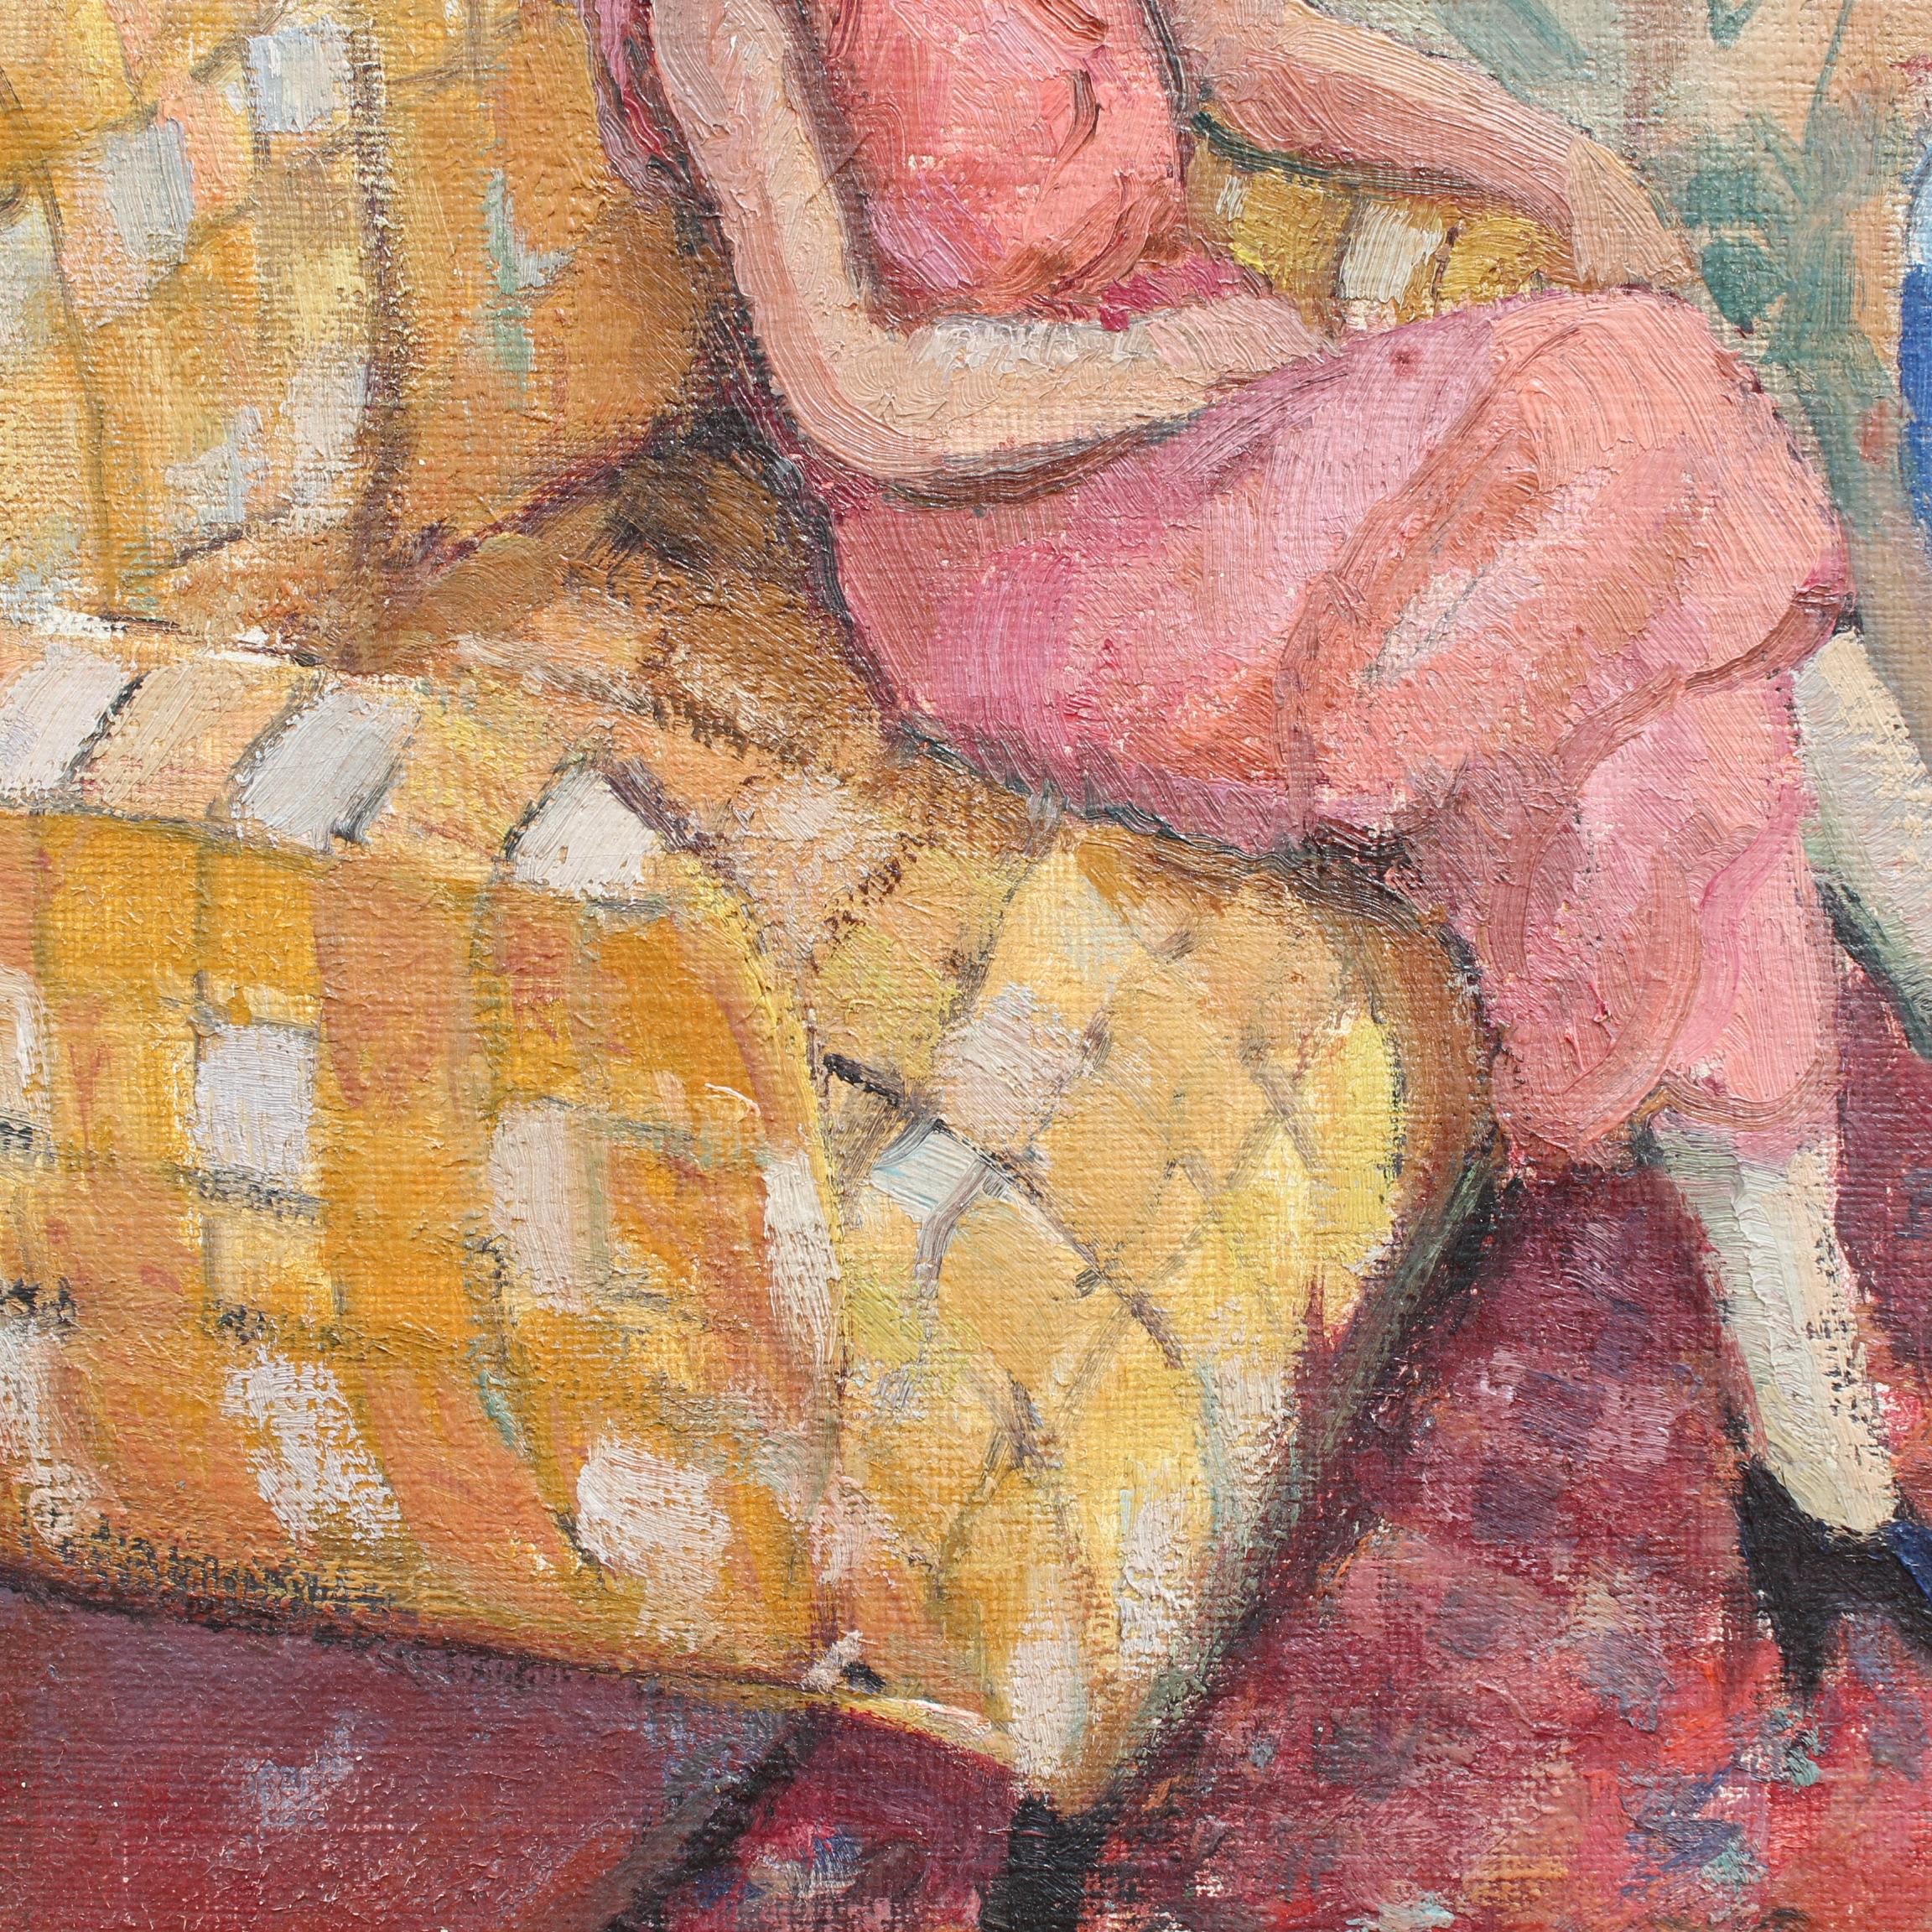 Seated Woman With Book 9